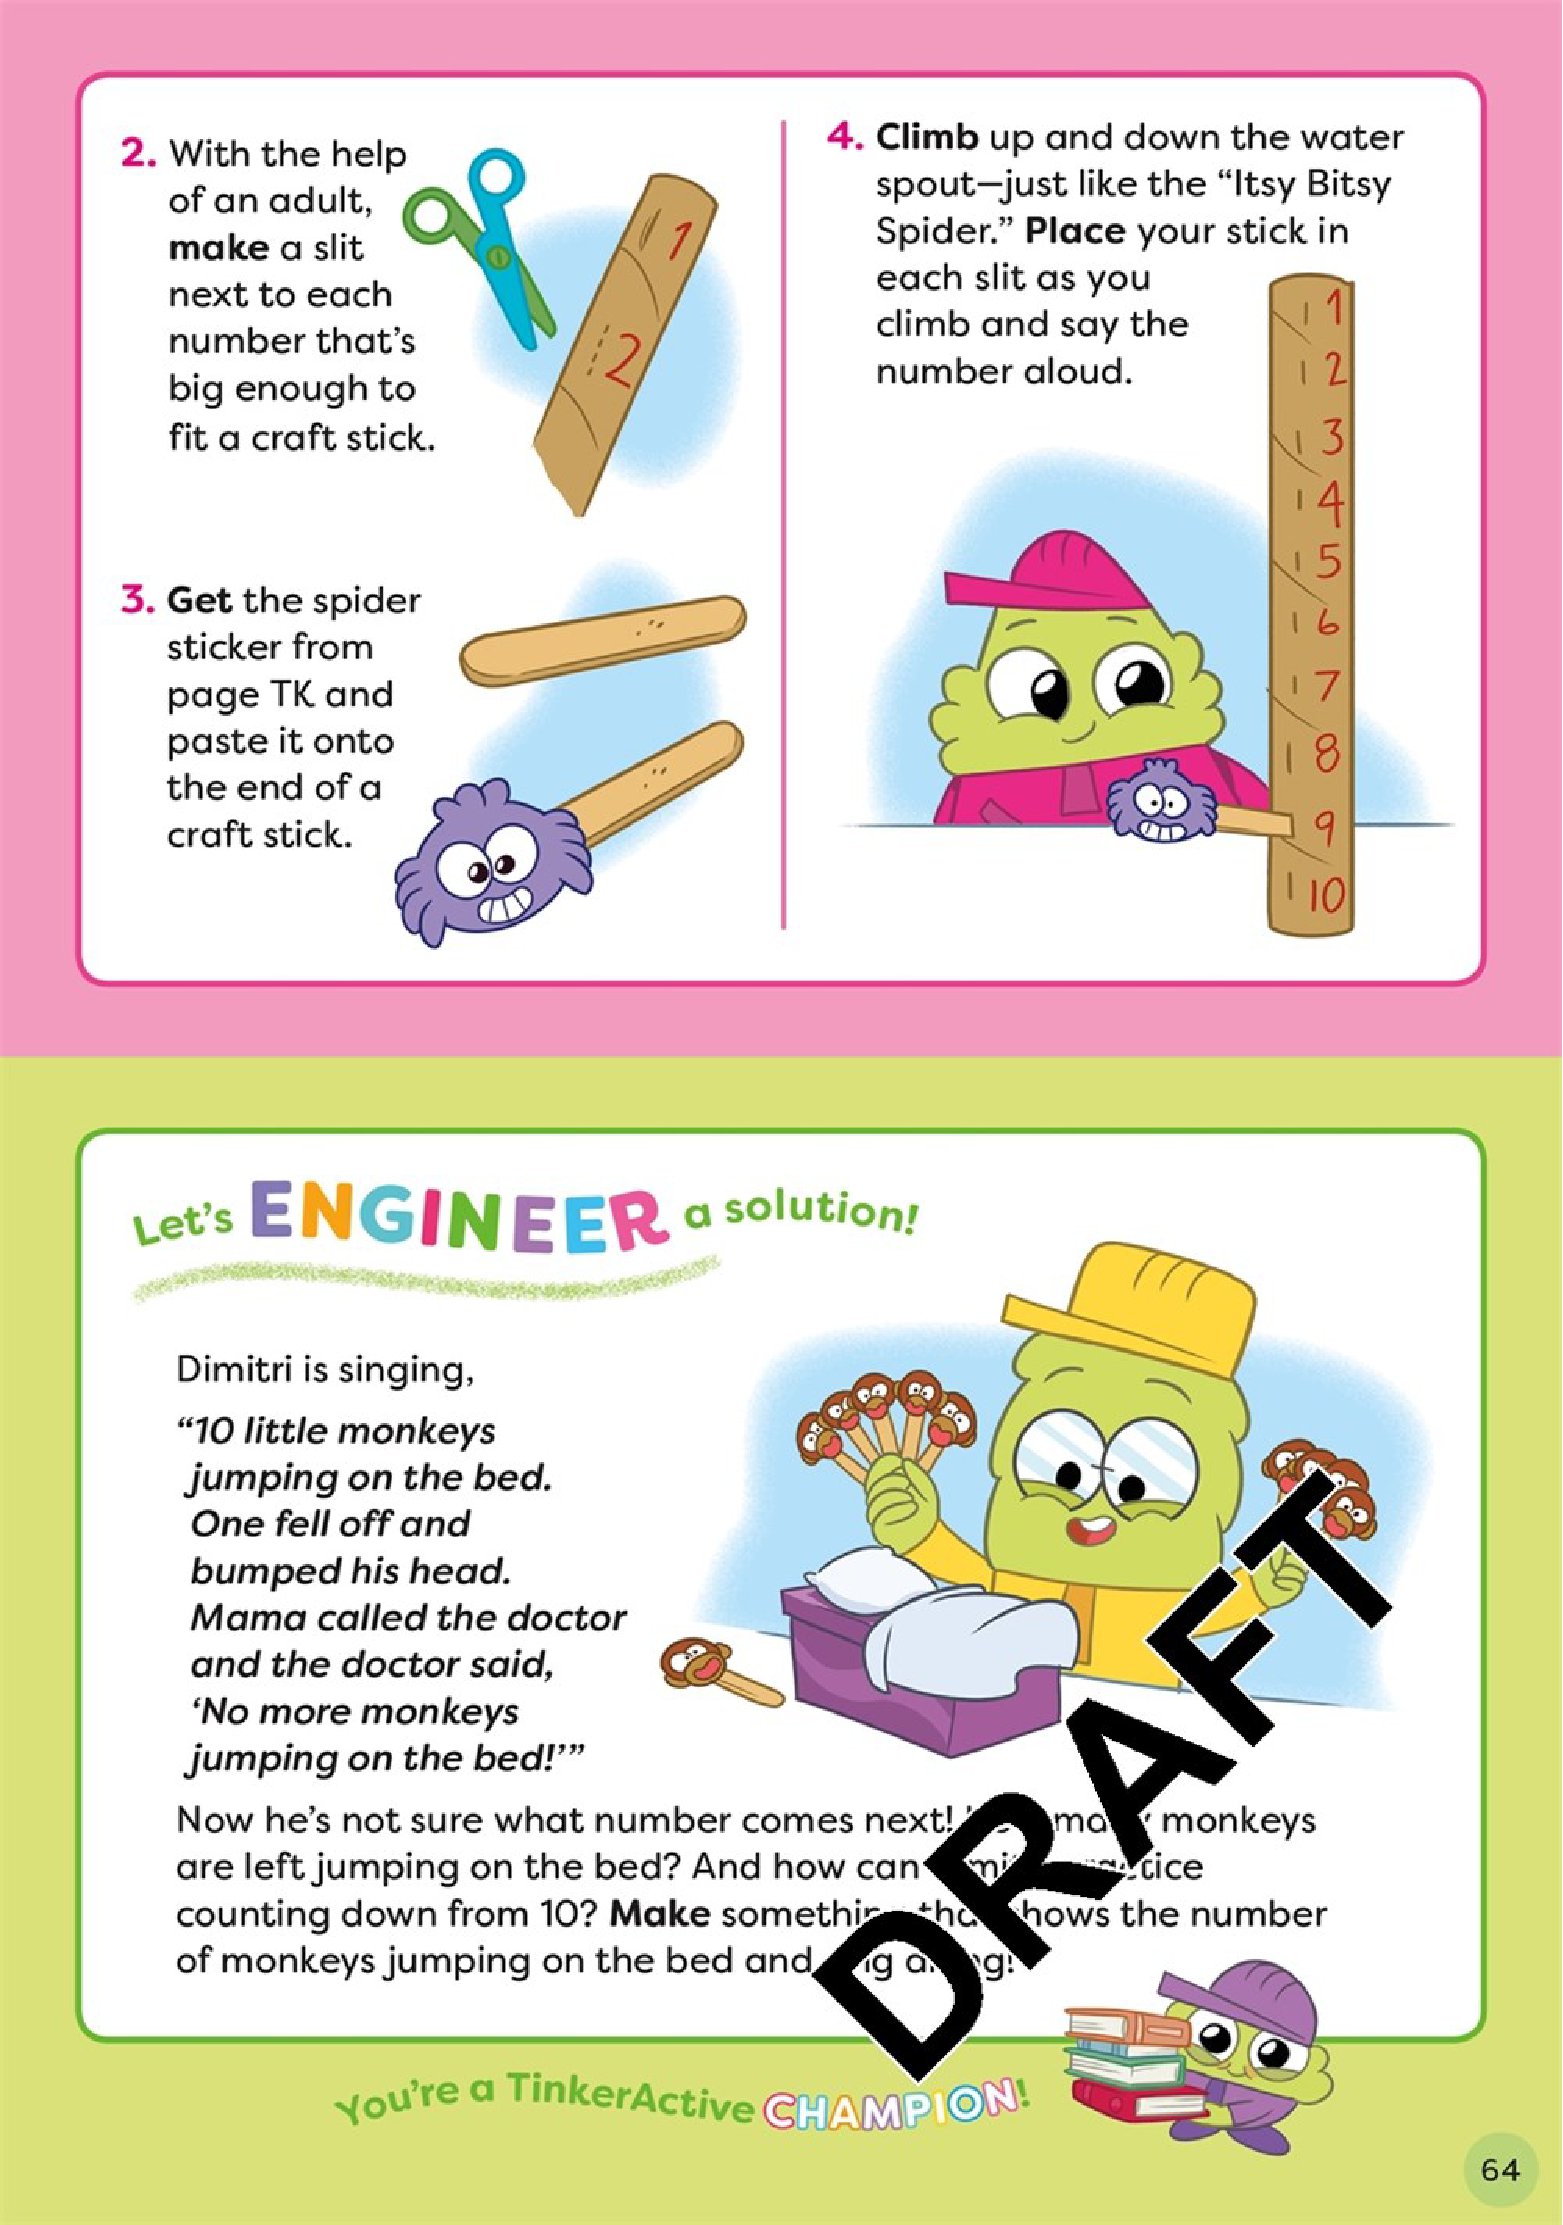 TinkerActive Early Skills Math Workbook Ages 3+